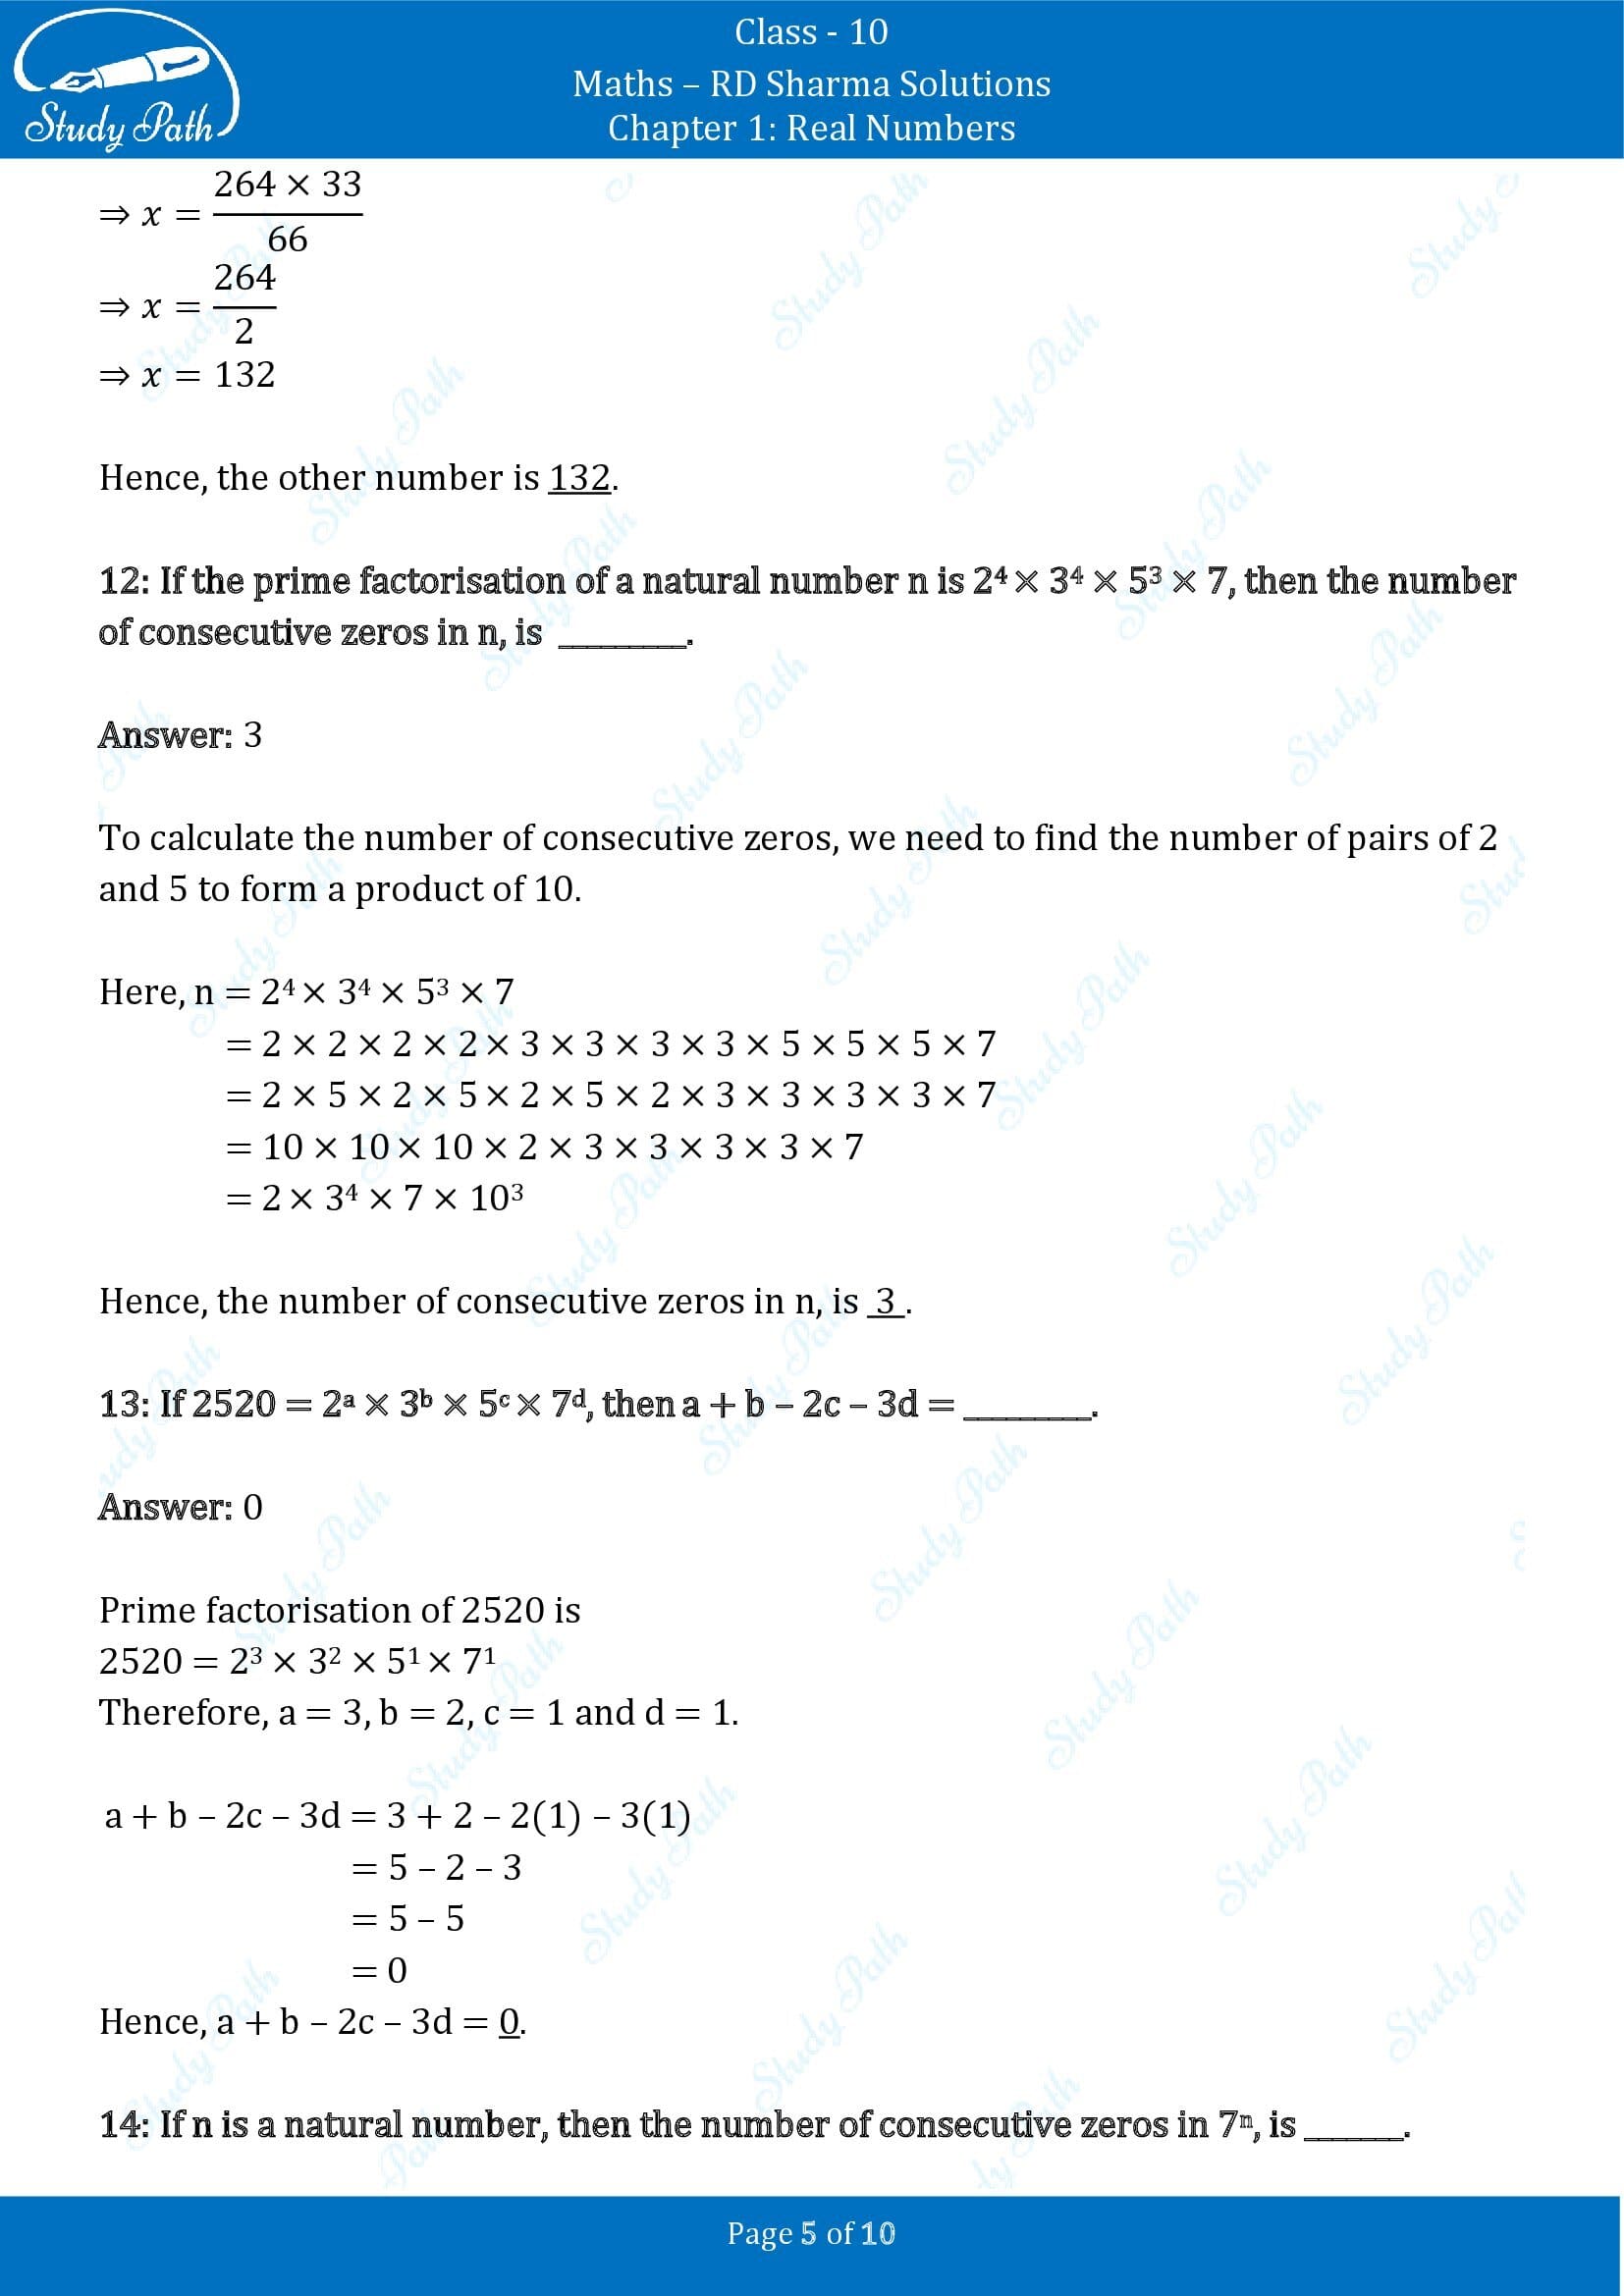 RD Sharma Solutions Class 10 Chapter 1 Real Numbers Fill in the Blank Type Questions FBQs 00005